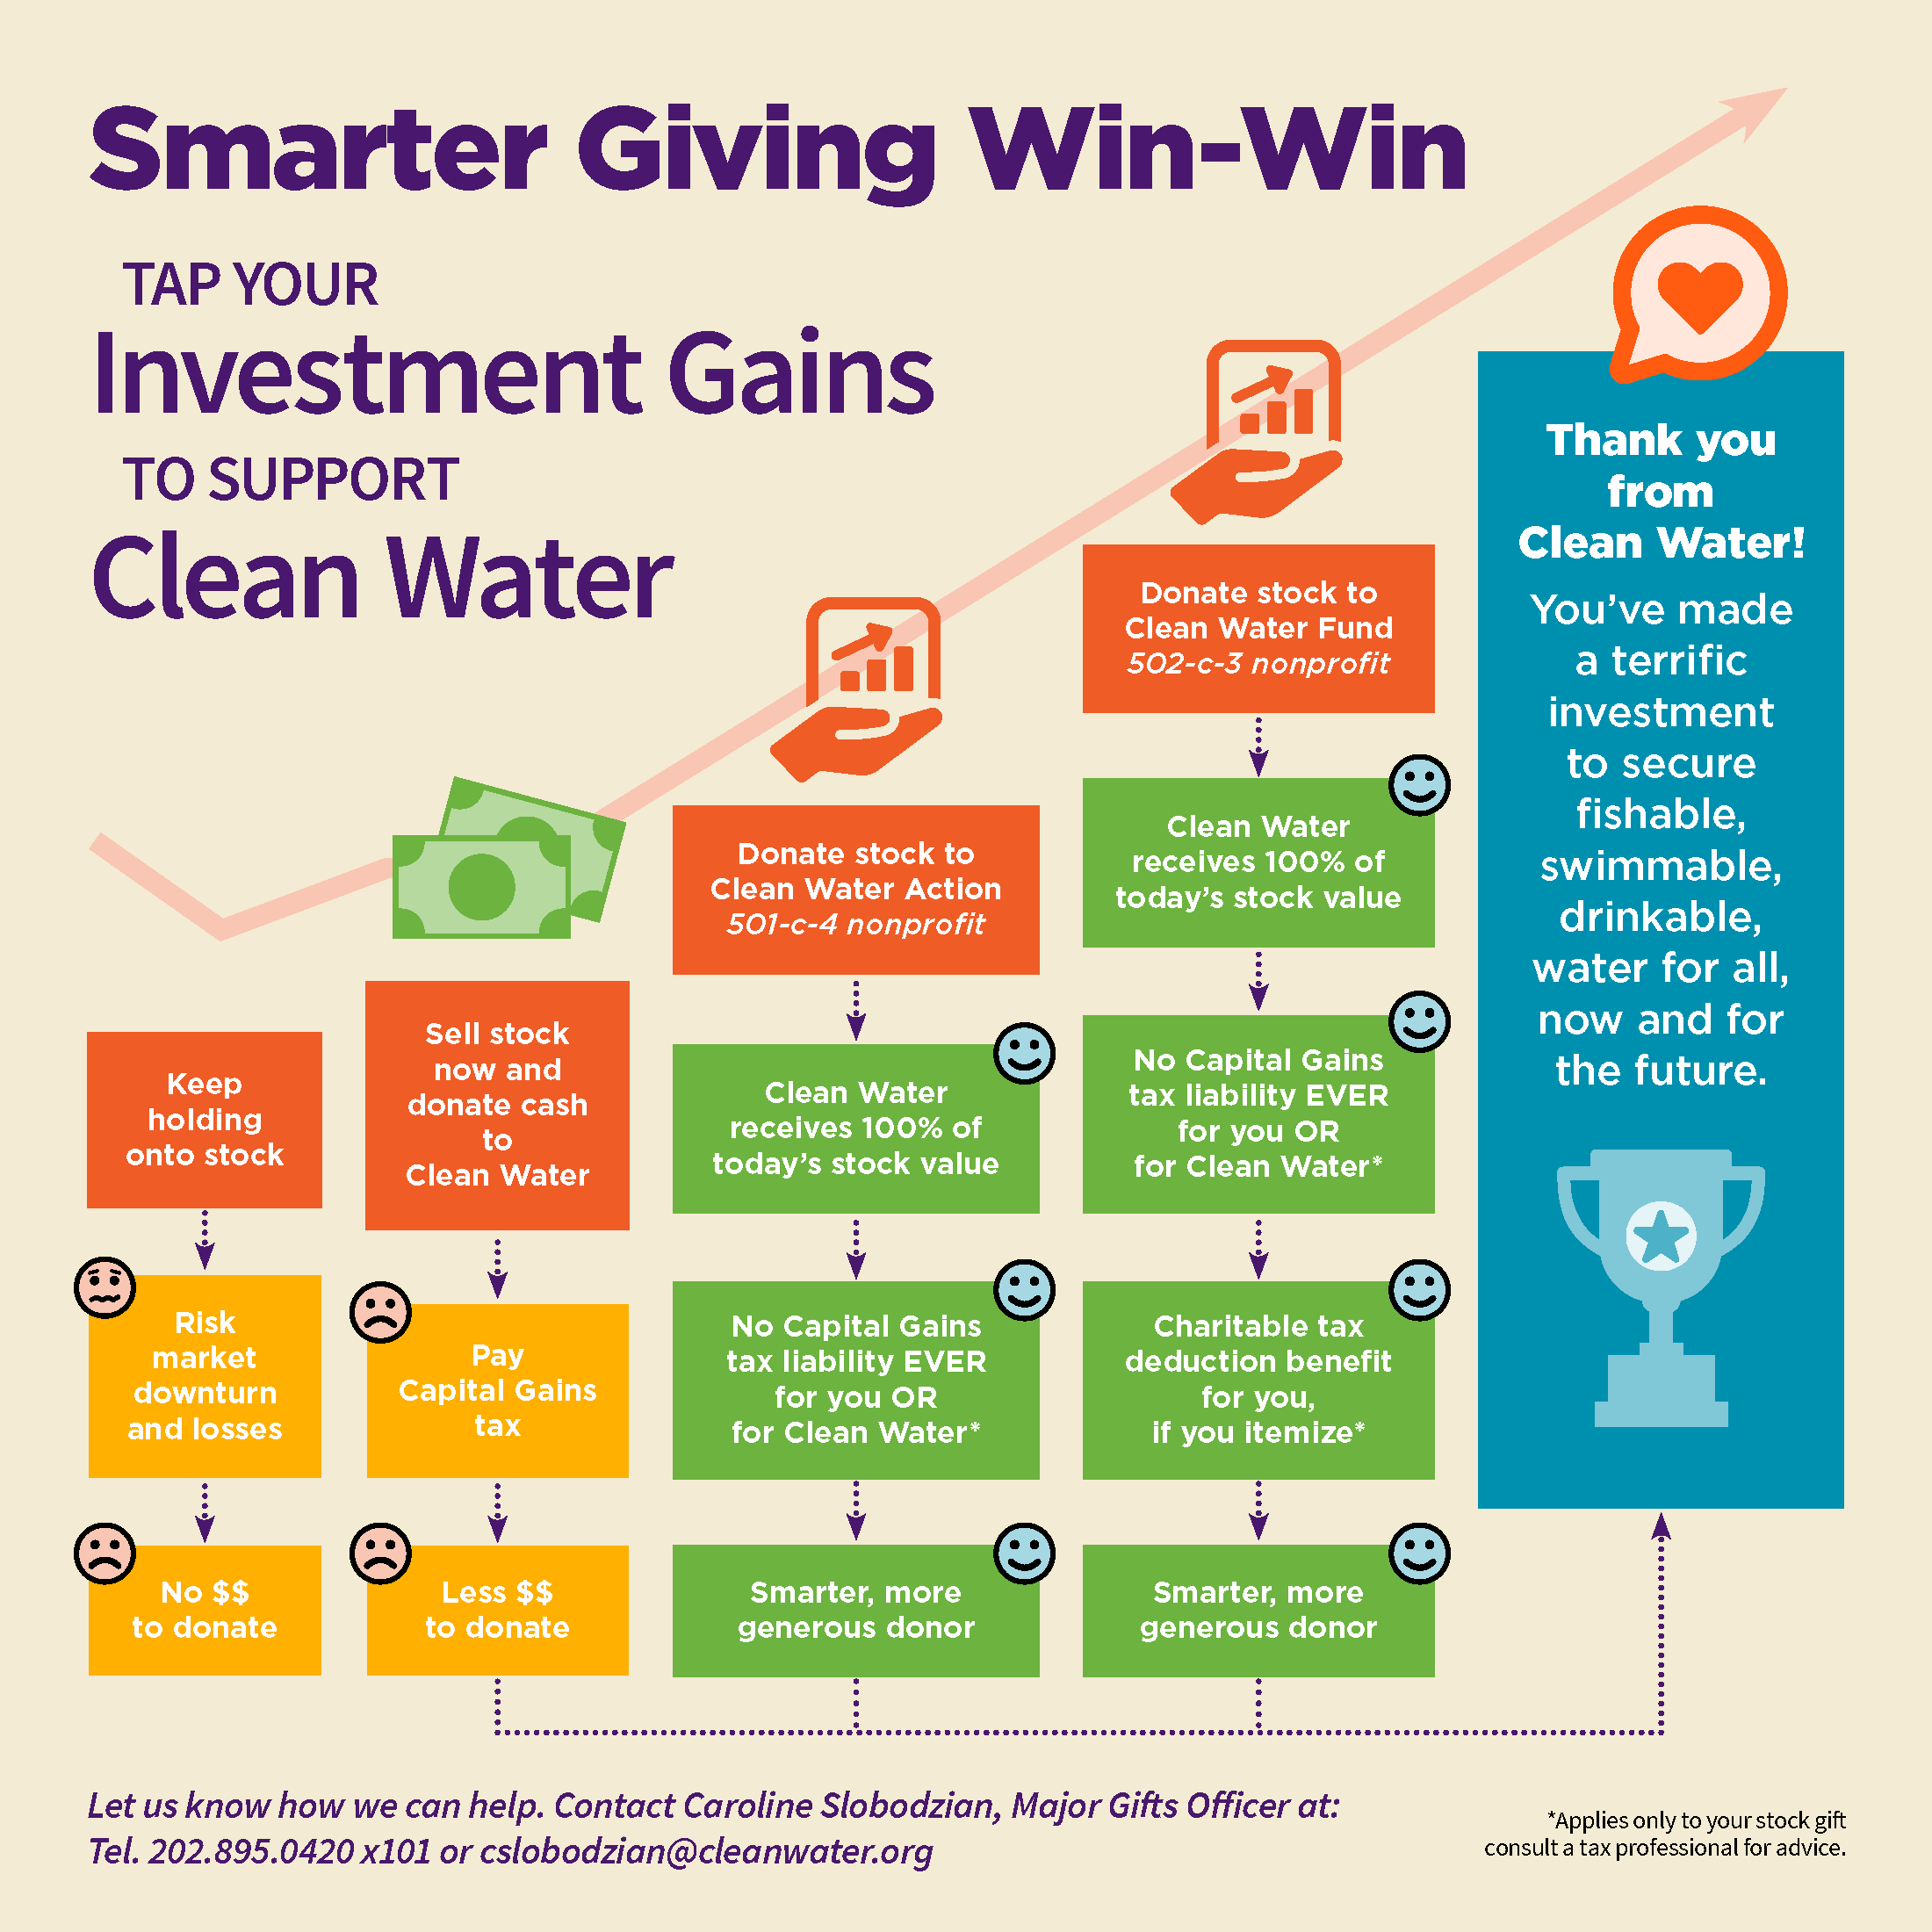 Smarter Giving Win-Win: Tap your investment gains to support Clean Water